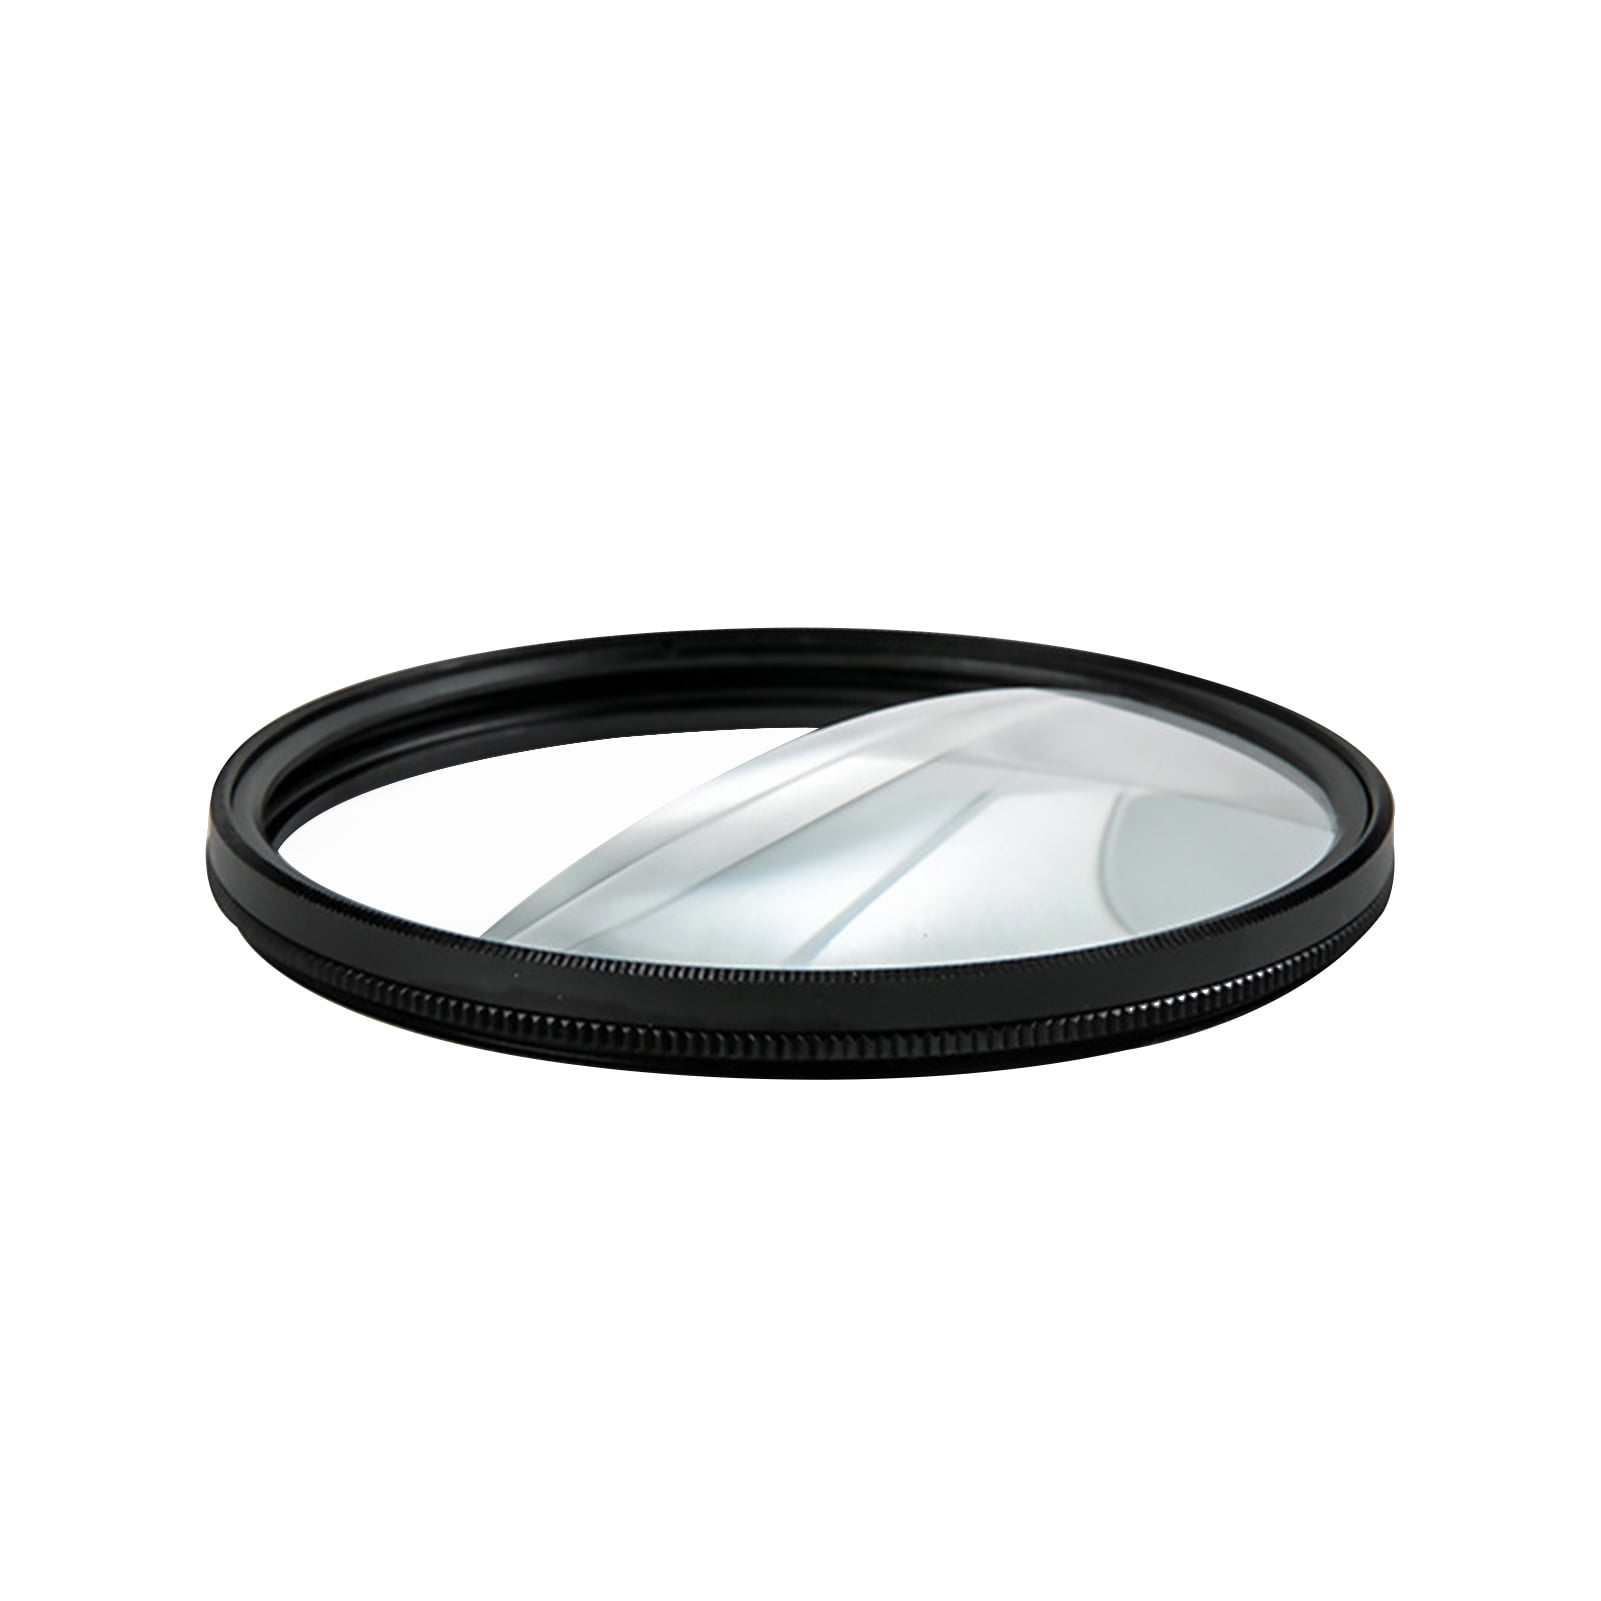 Nanotec Coatings 95mm X2 CPL Circular Polarizing Filter for Camera Lenses AGC Optical Glass Polarizer Filter with Lens Cloth Weather Sealed by Breakthrough Photography MRC8 